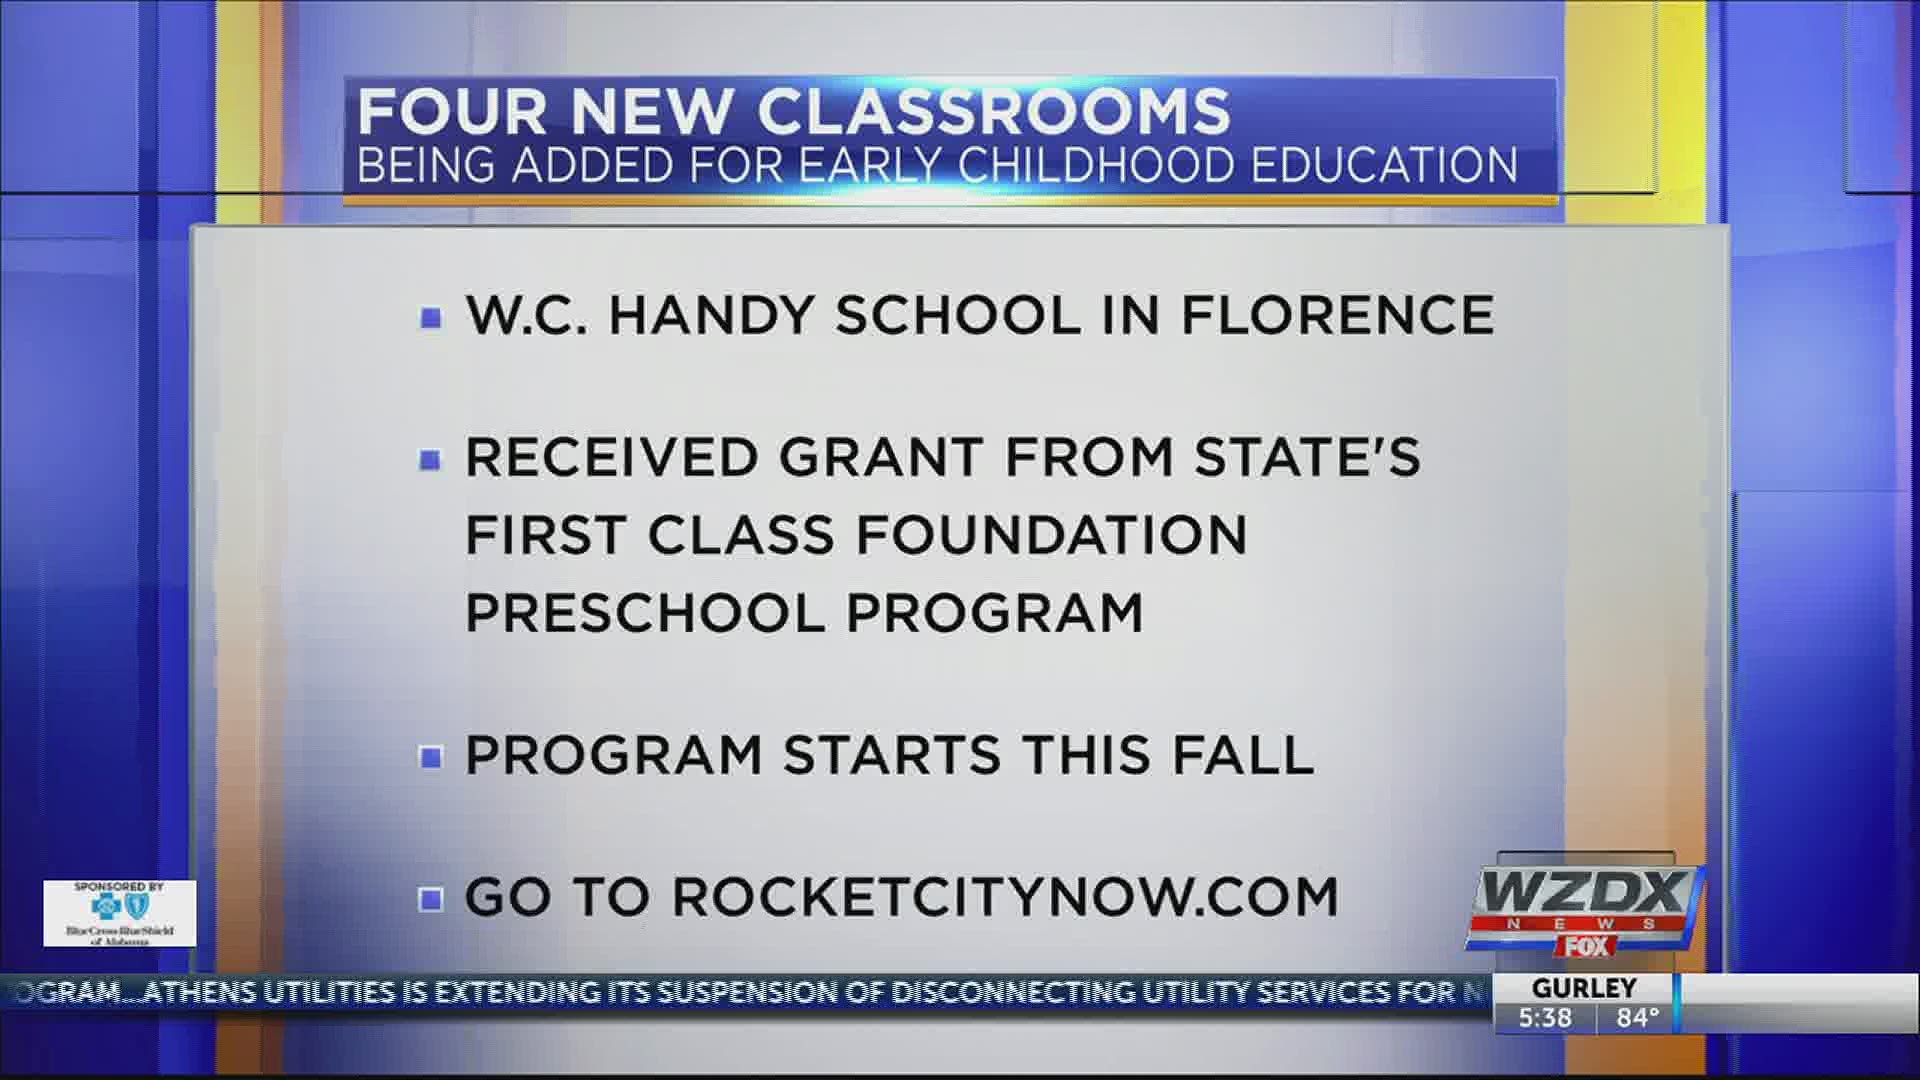 Three-year grant worth over $1.2 million will add classrooms for children ages 6 weeks to three years old.